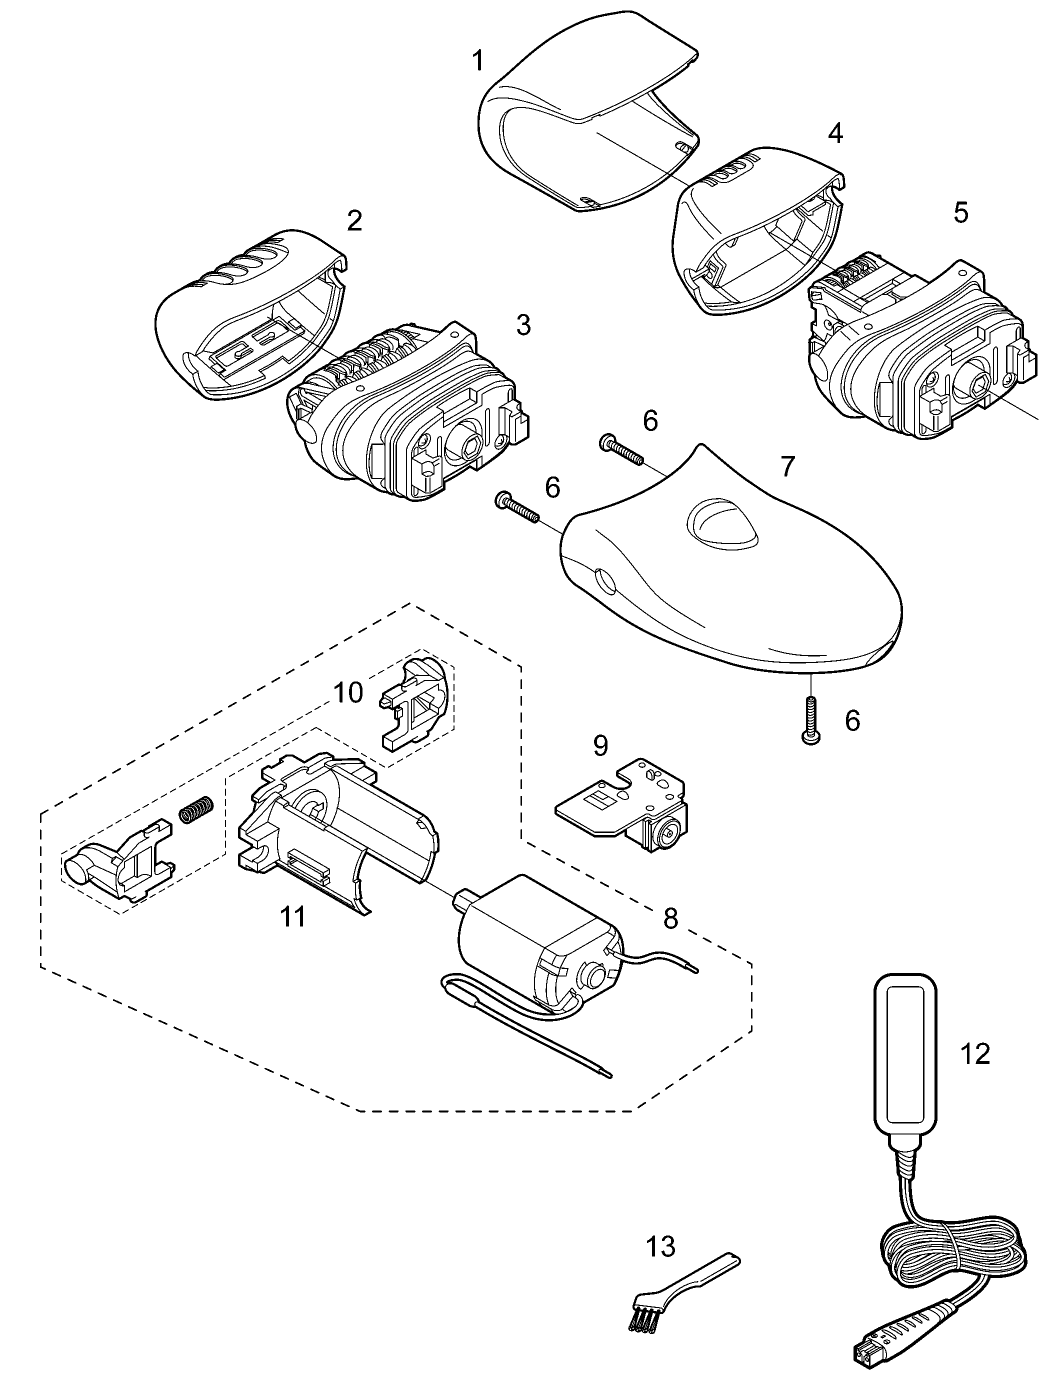 ES-WU31: Exploded View